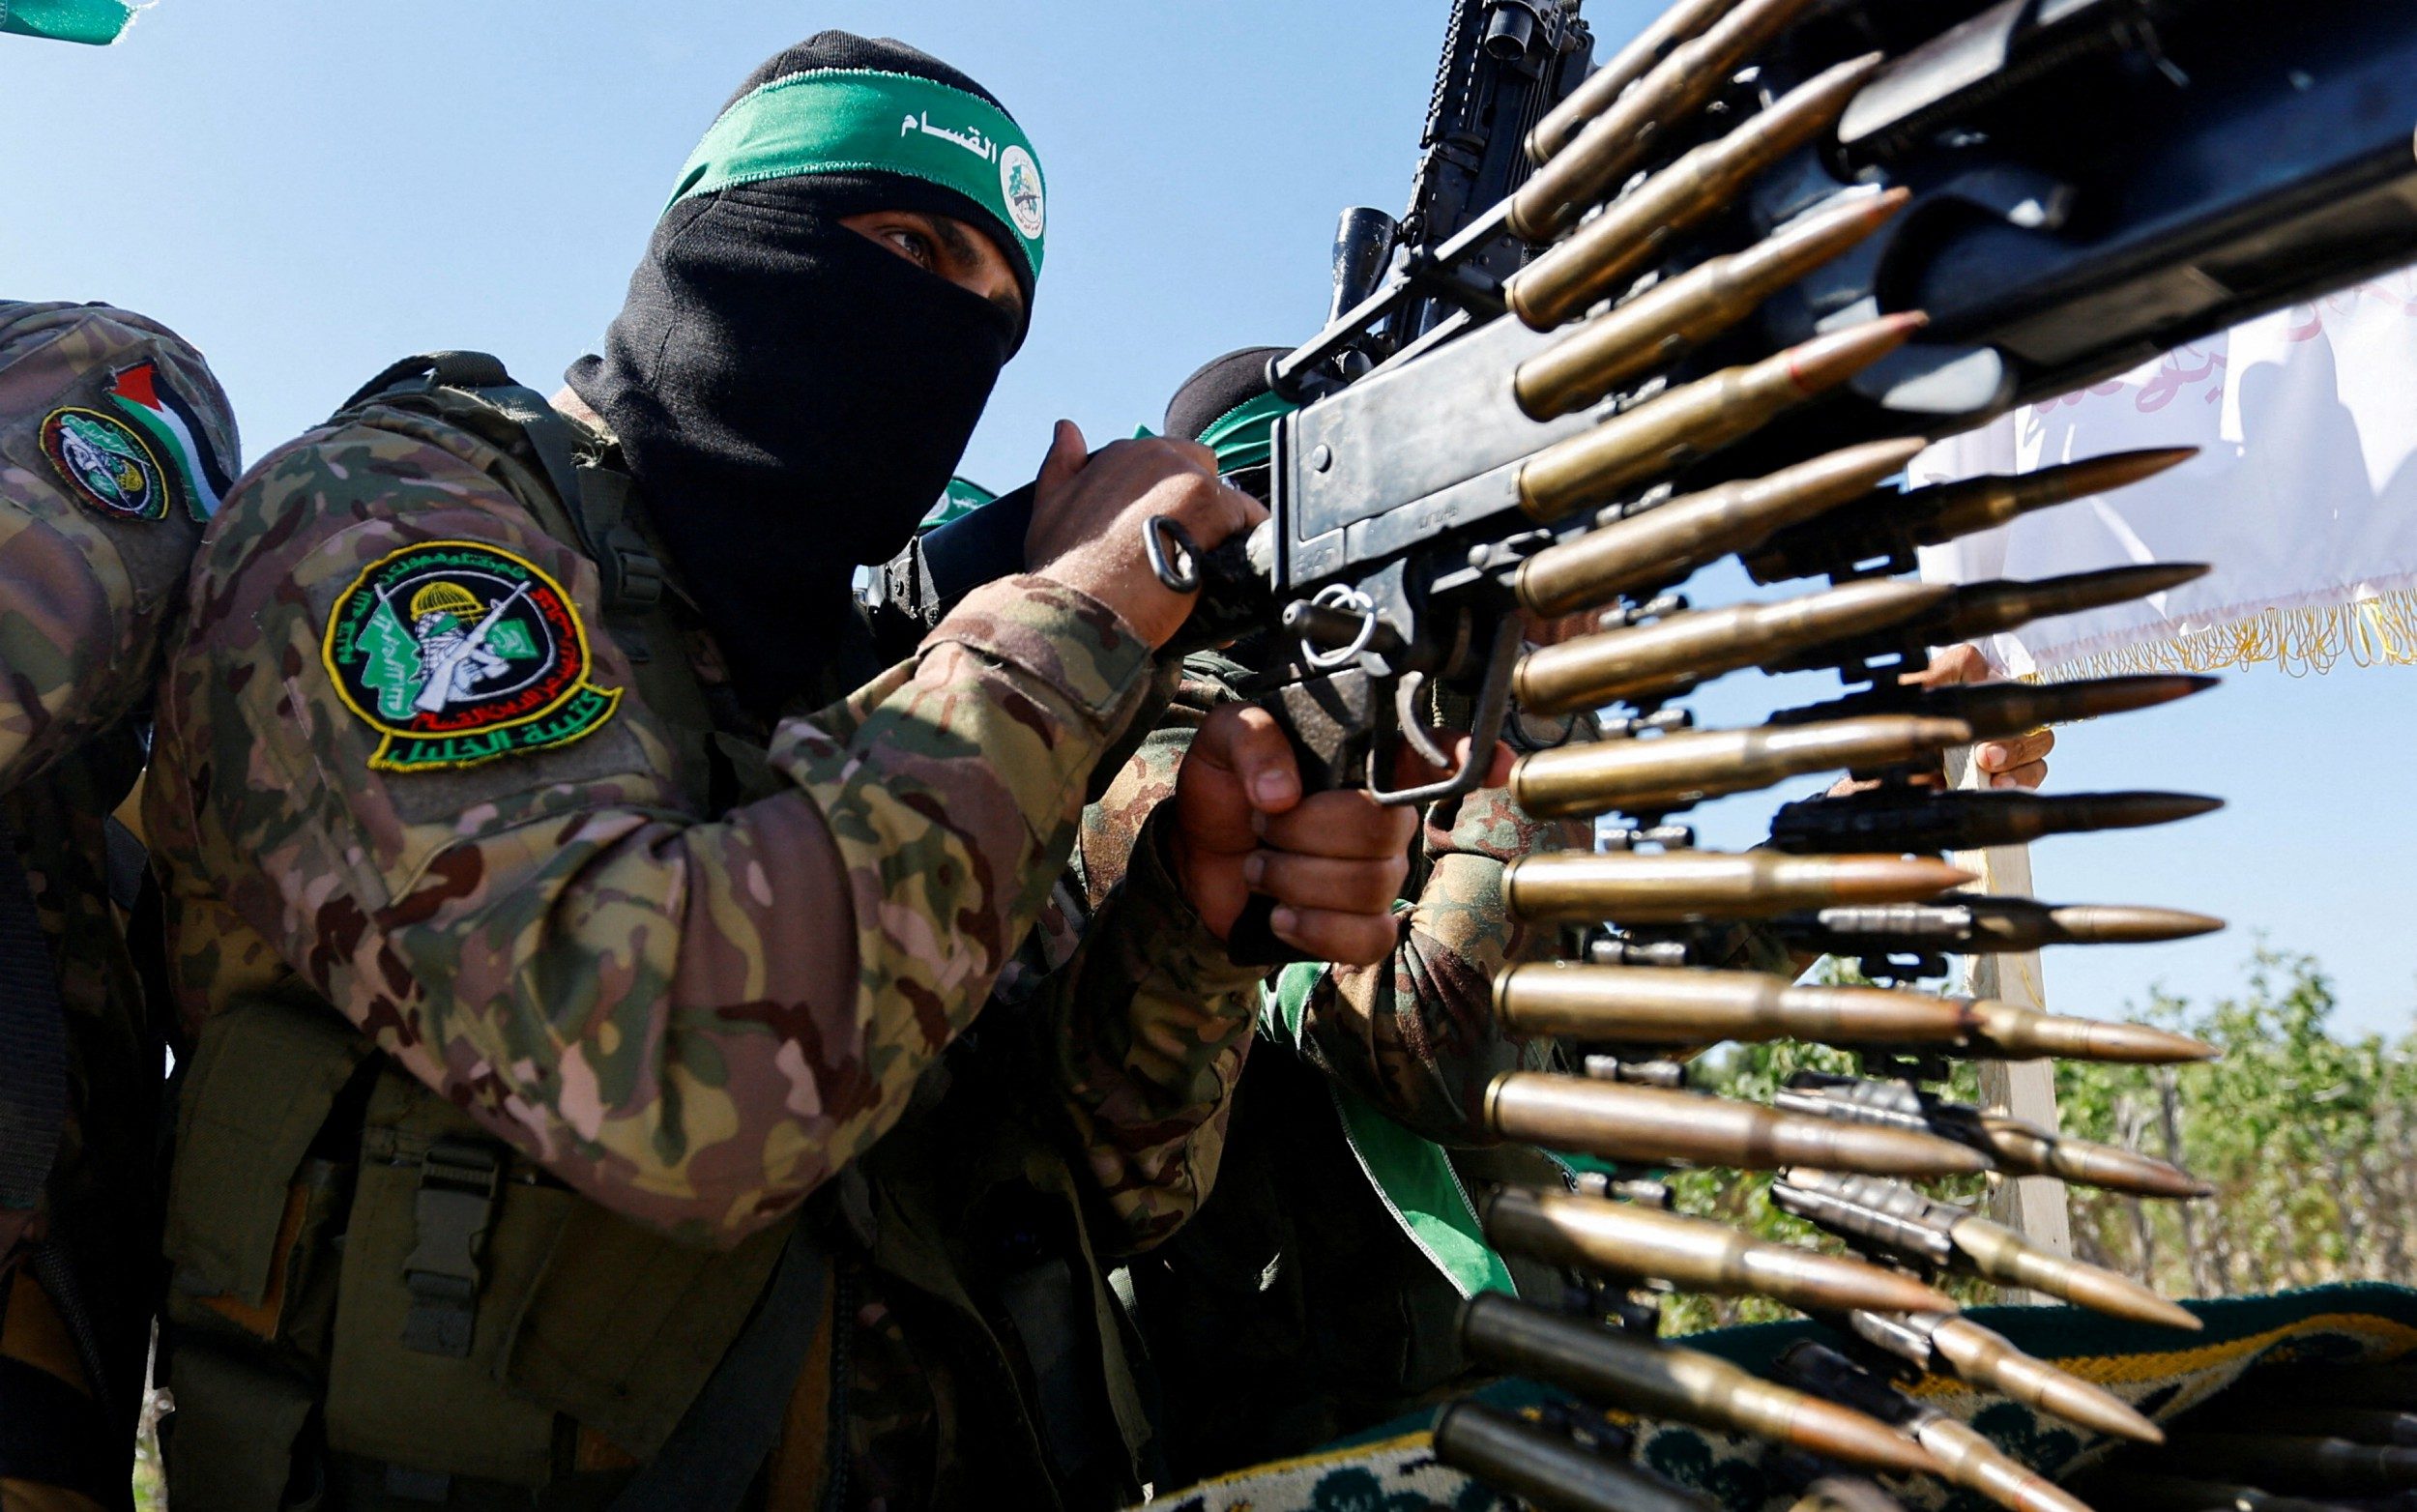 hamas is blackmailing the west into submission